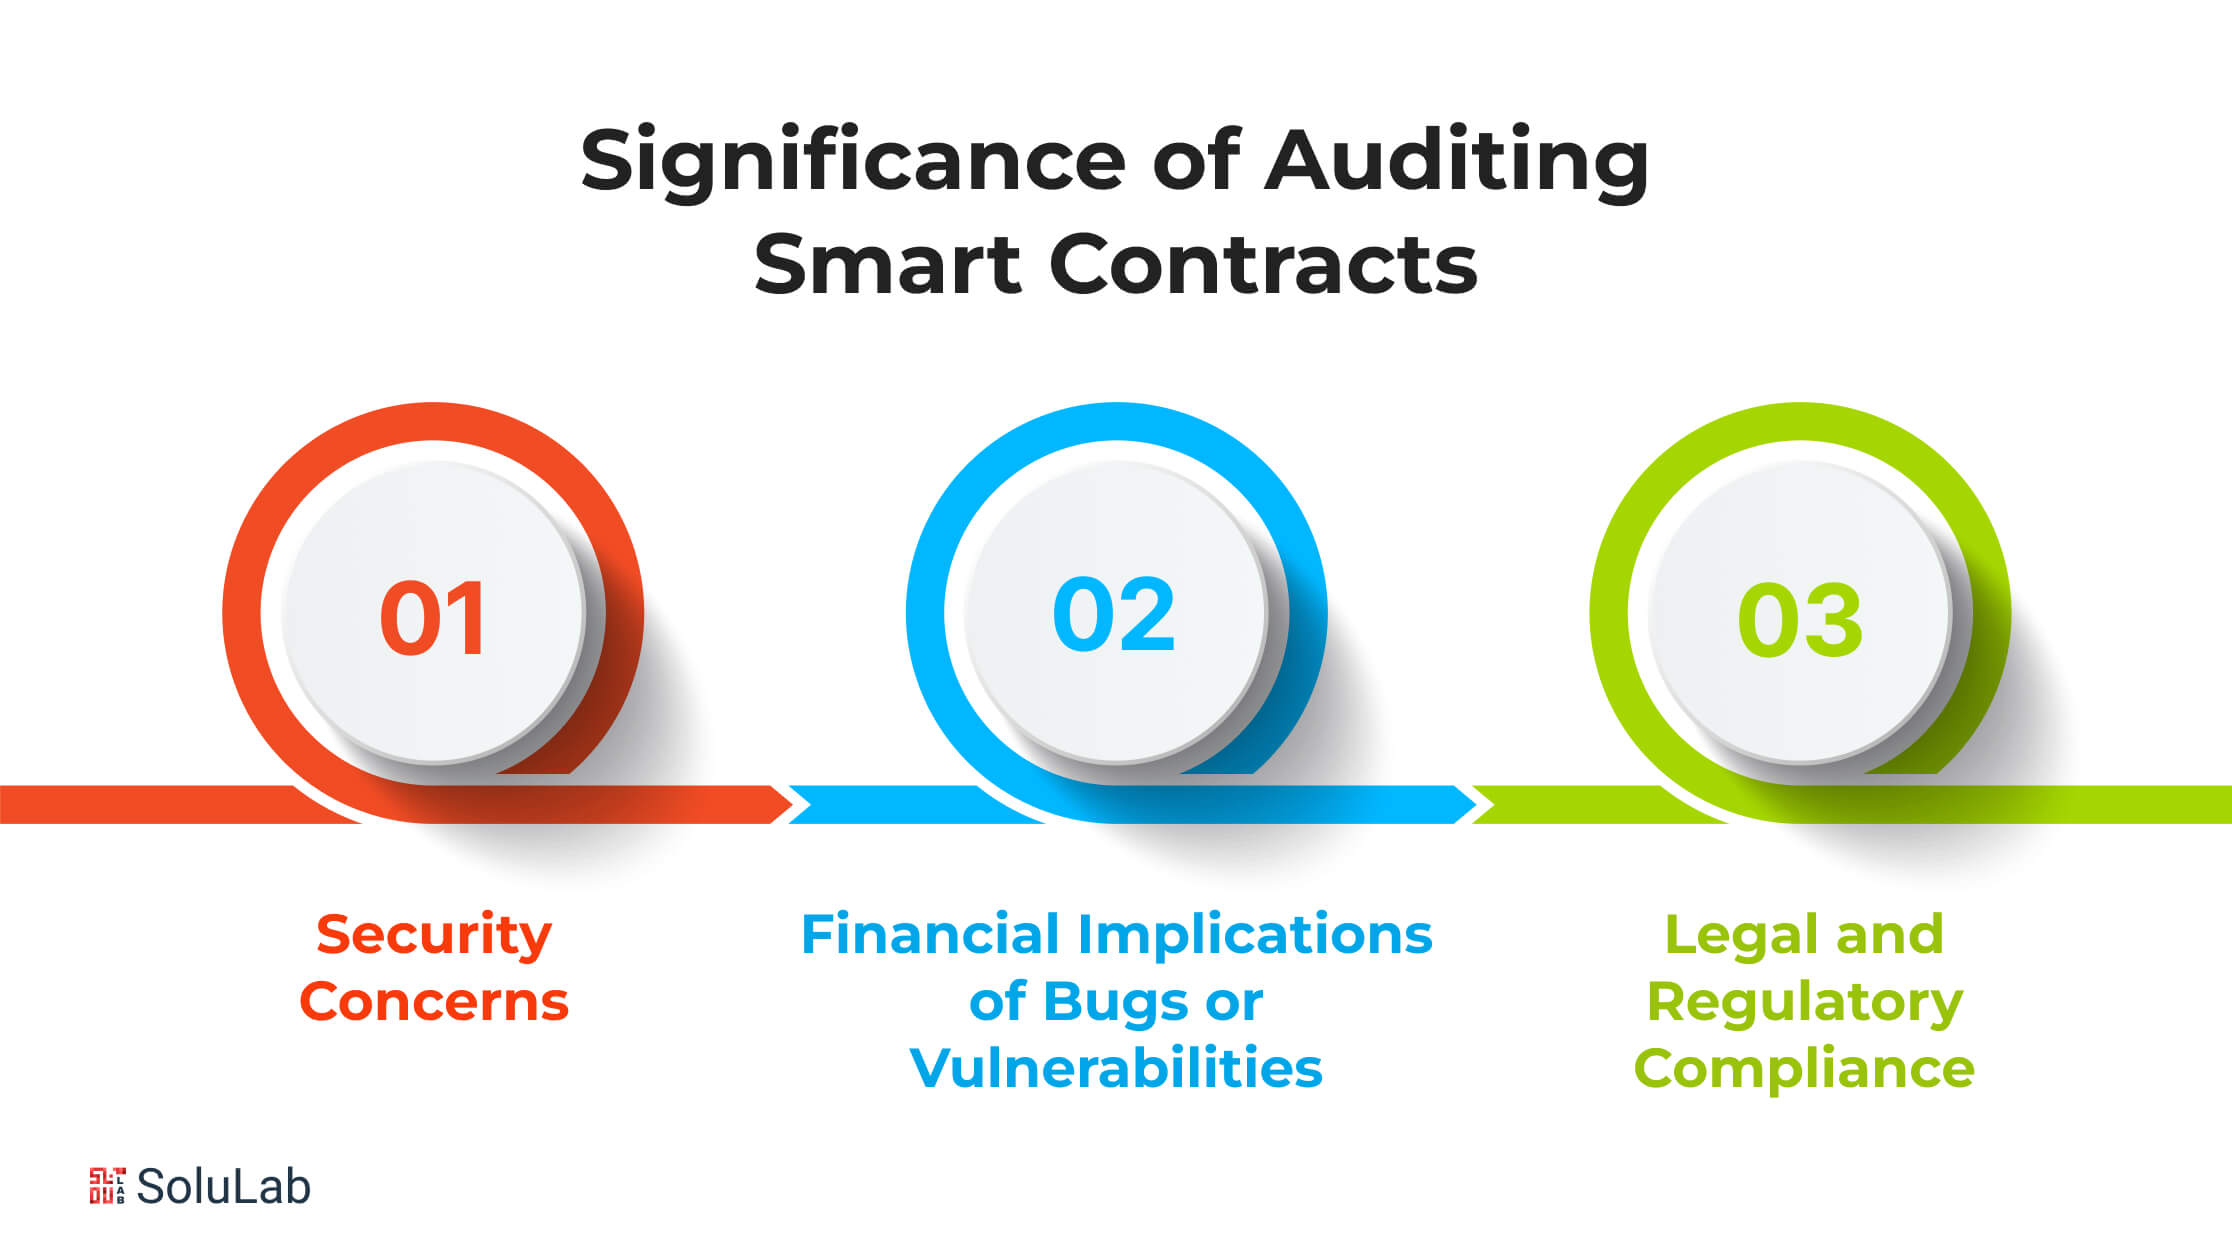 Significance of Auditing Smart Contracts